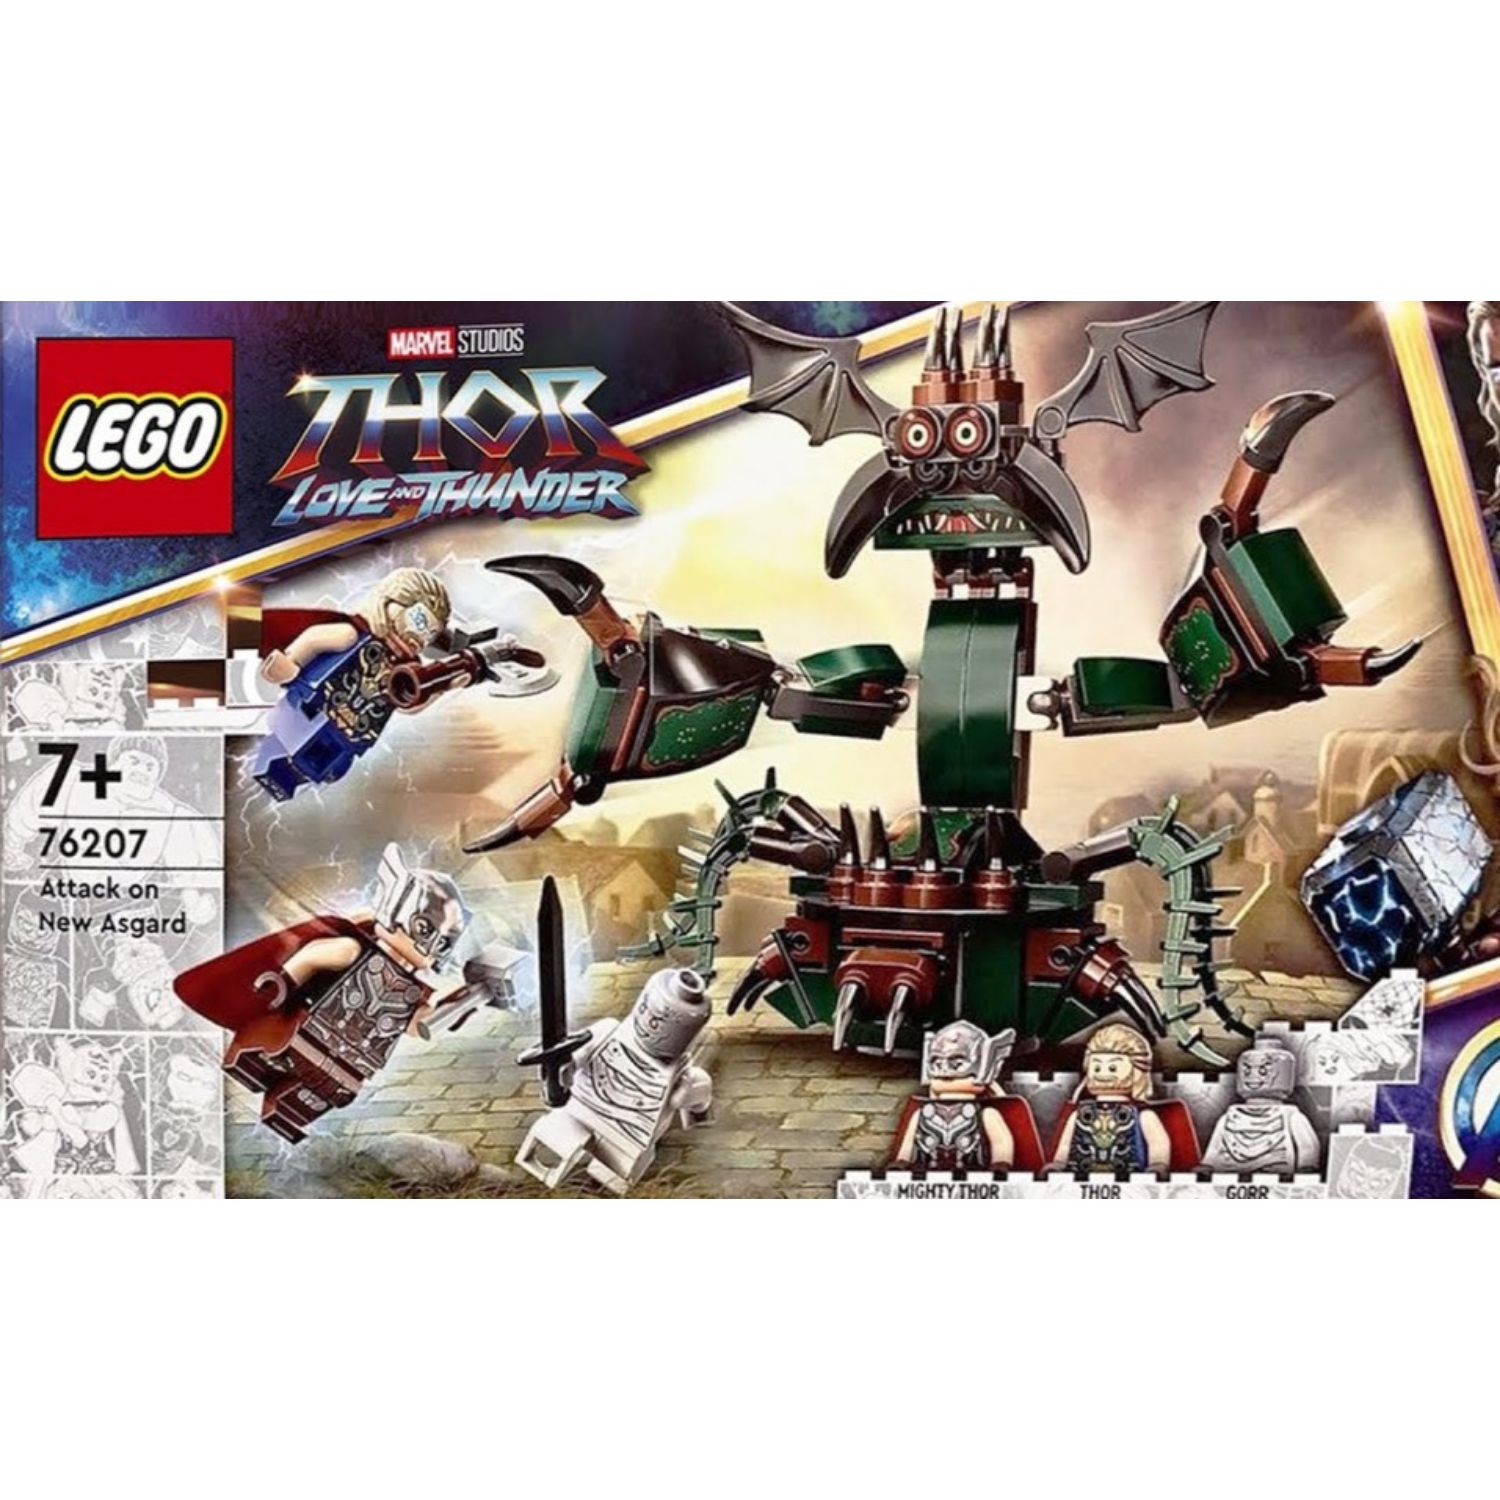 LEGO 76207 SUPER HEROES ATTACK ON NEW ASGARD